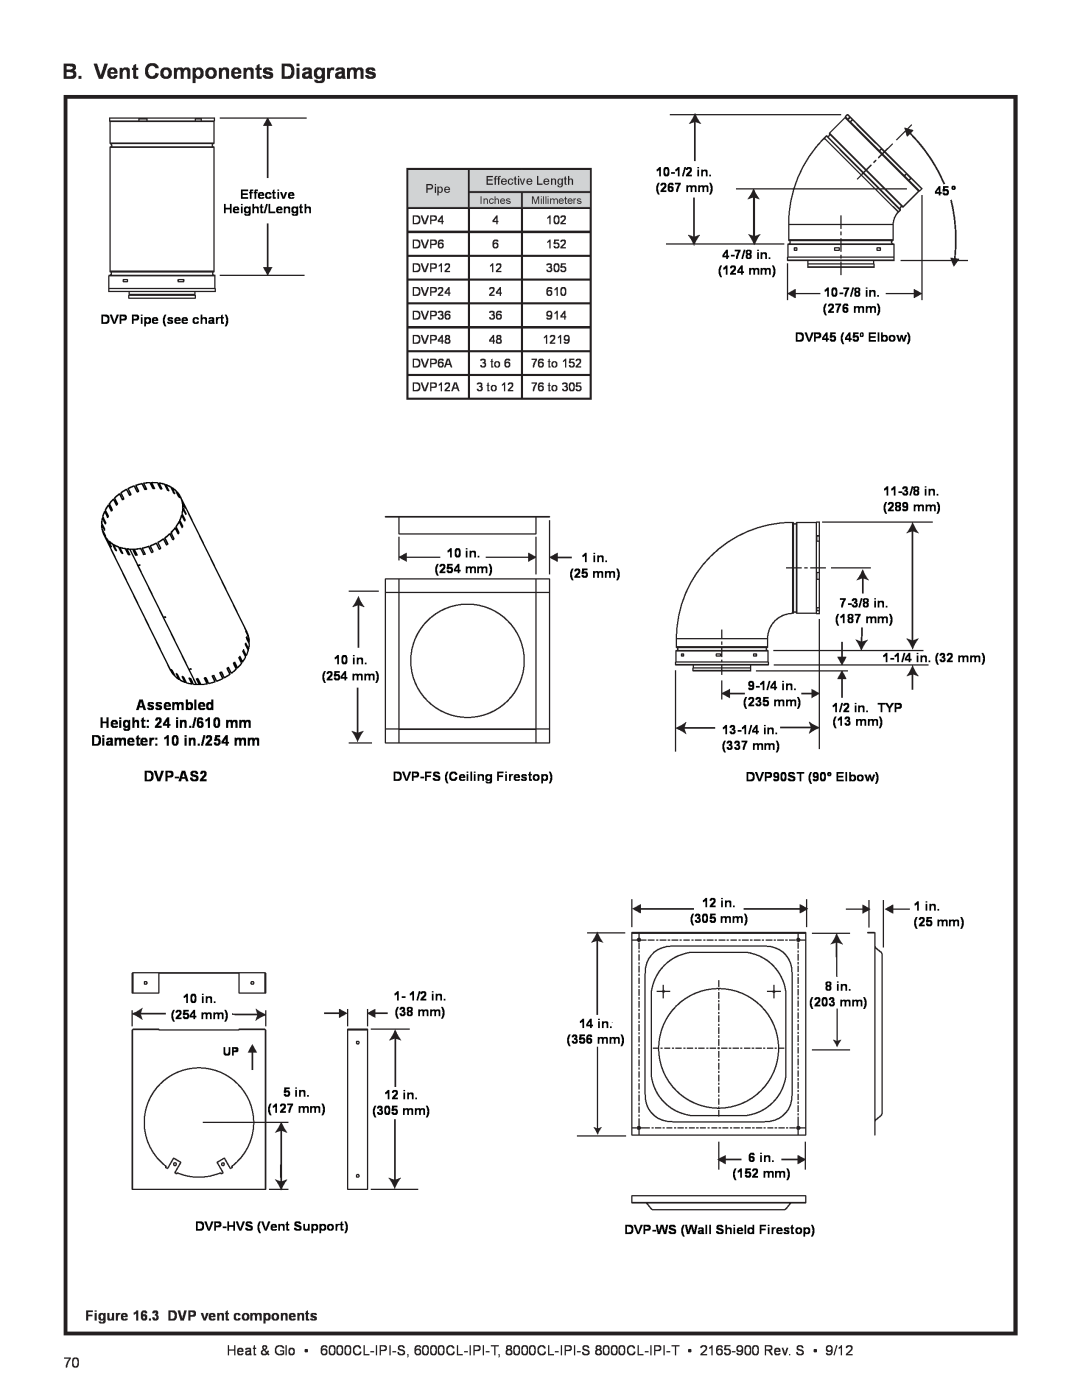 Heat & Glo LifeStyle 6000CL-IPI-S manual B. Vent Components Diagrams, Height: 24 in./610 mm, DVP-AS2, Heat & Glo •, 9/12 